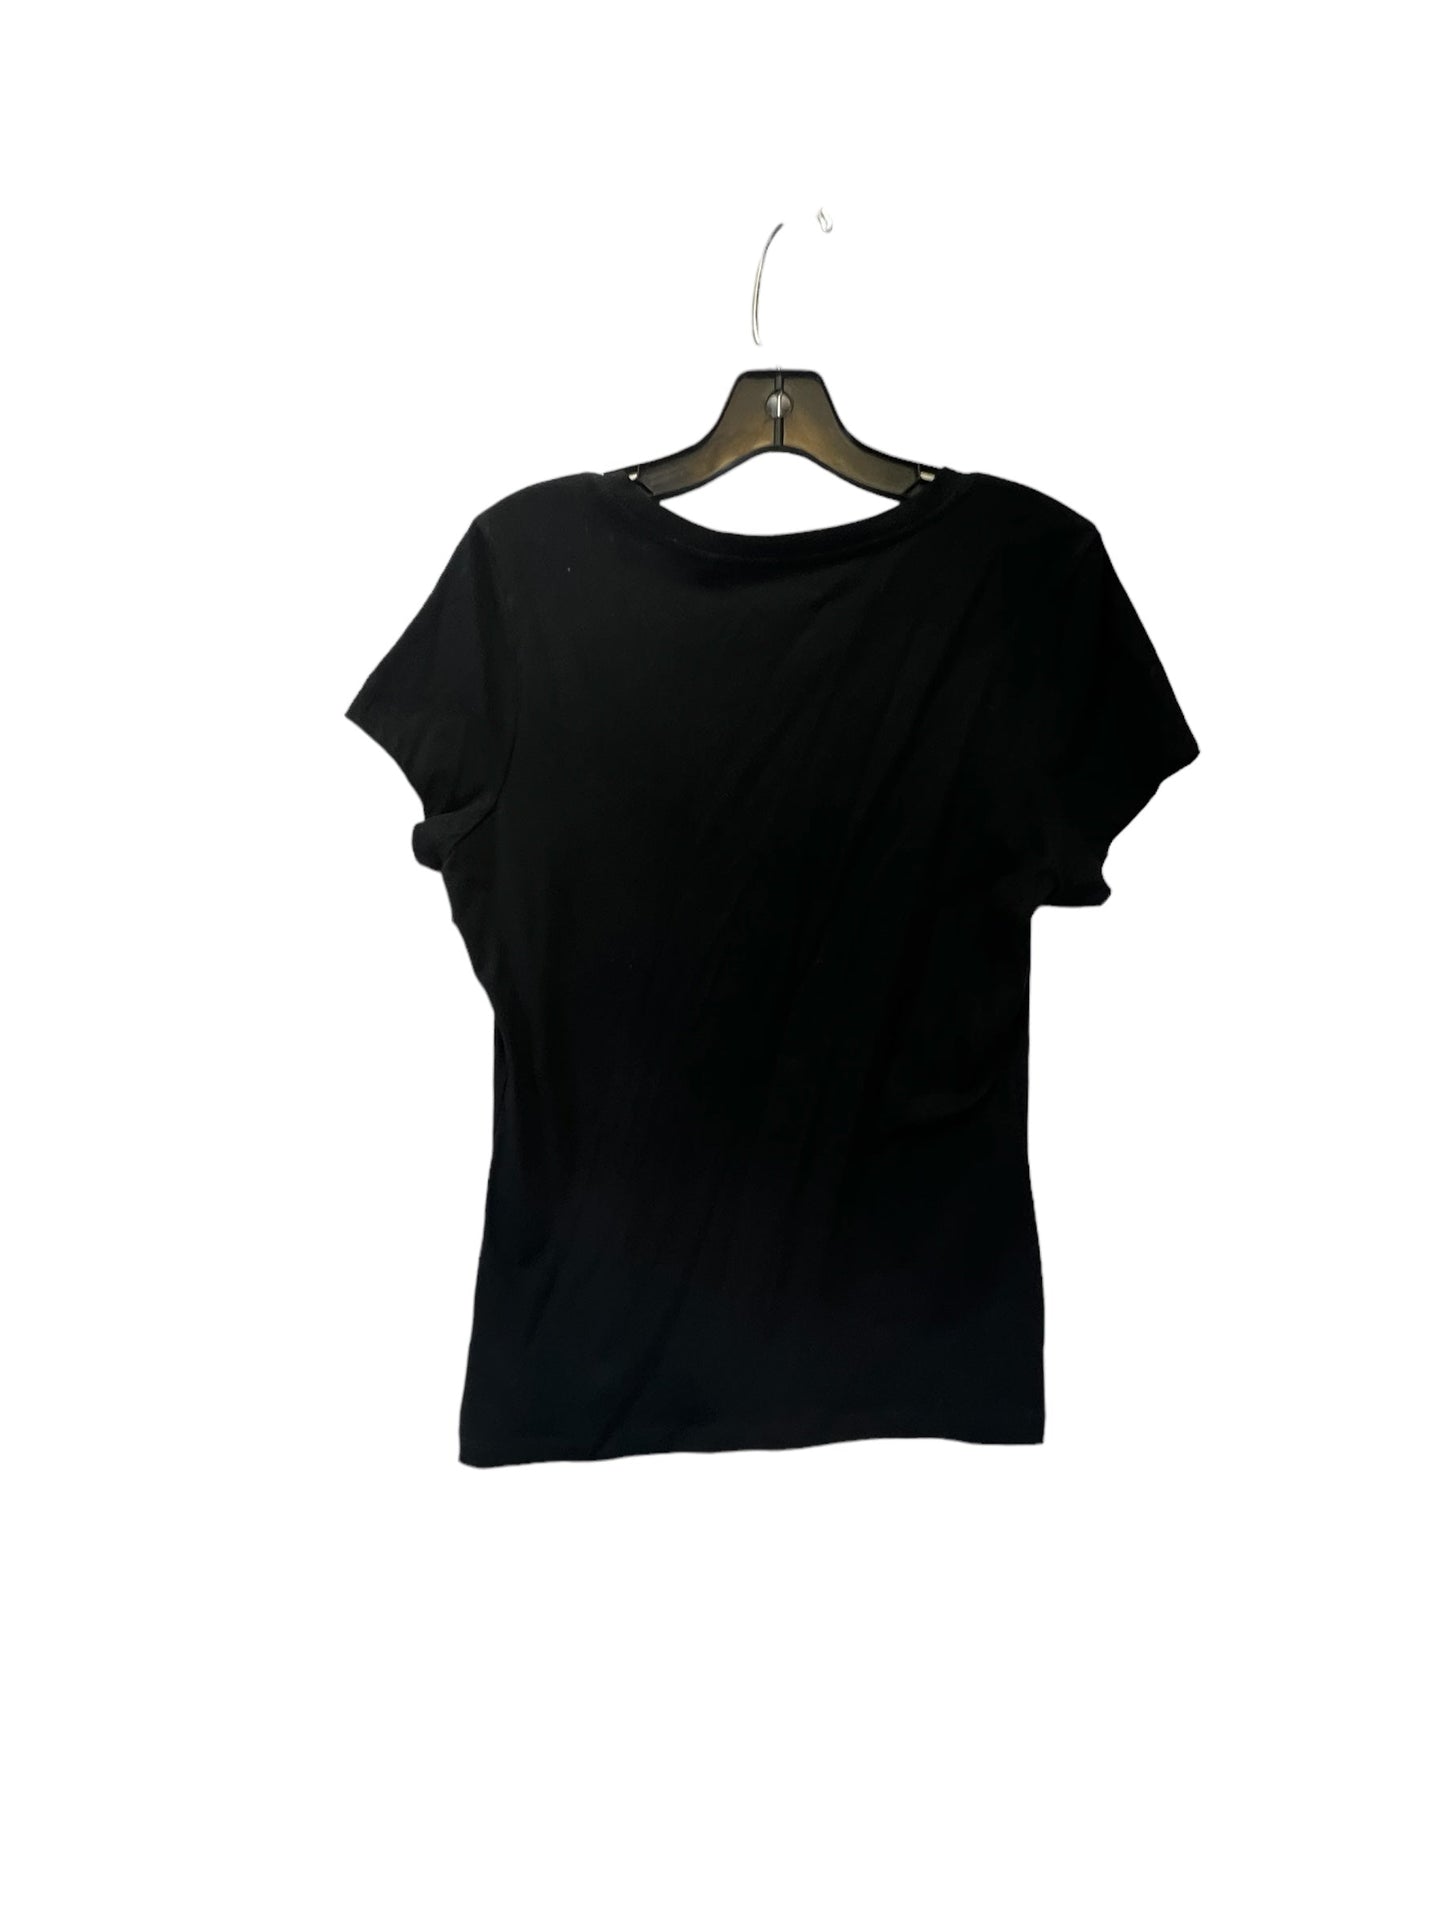 Black Top Short Sleeve Basic Guess, Size L